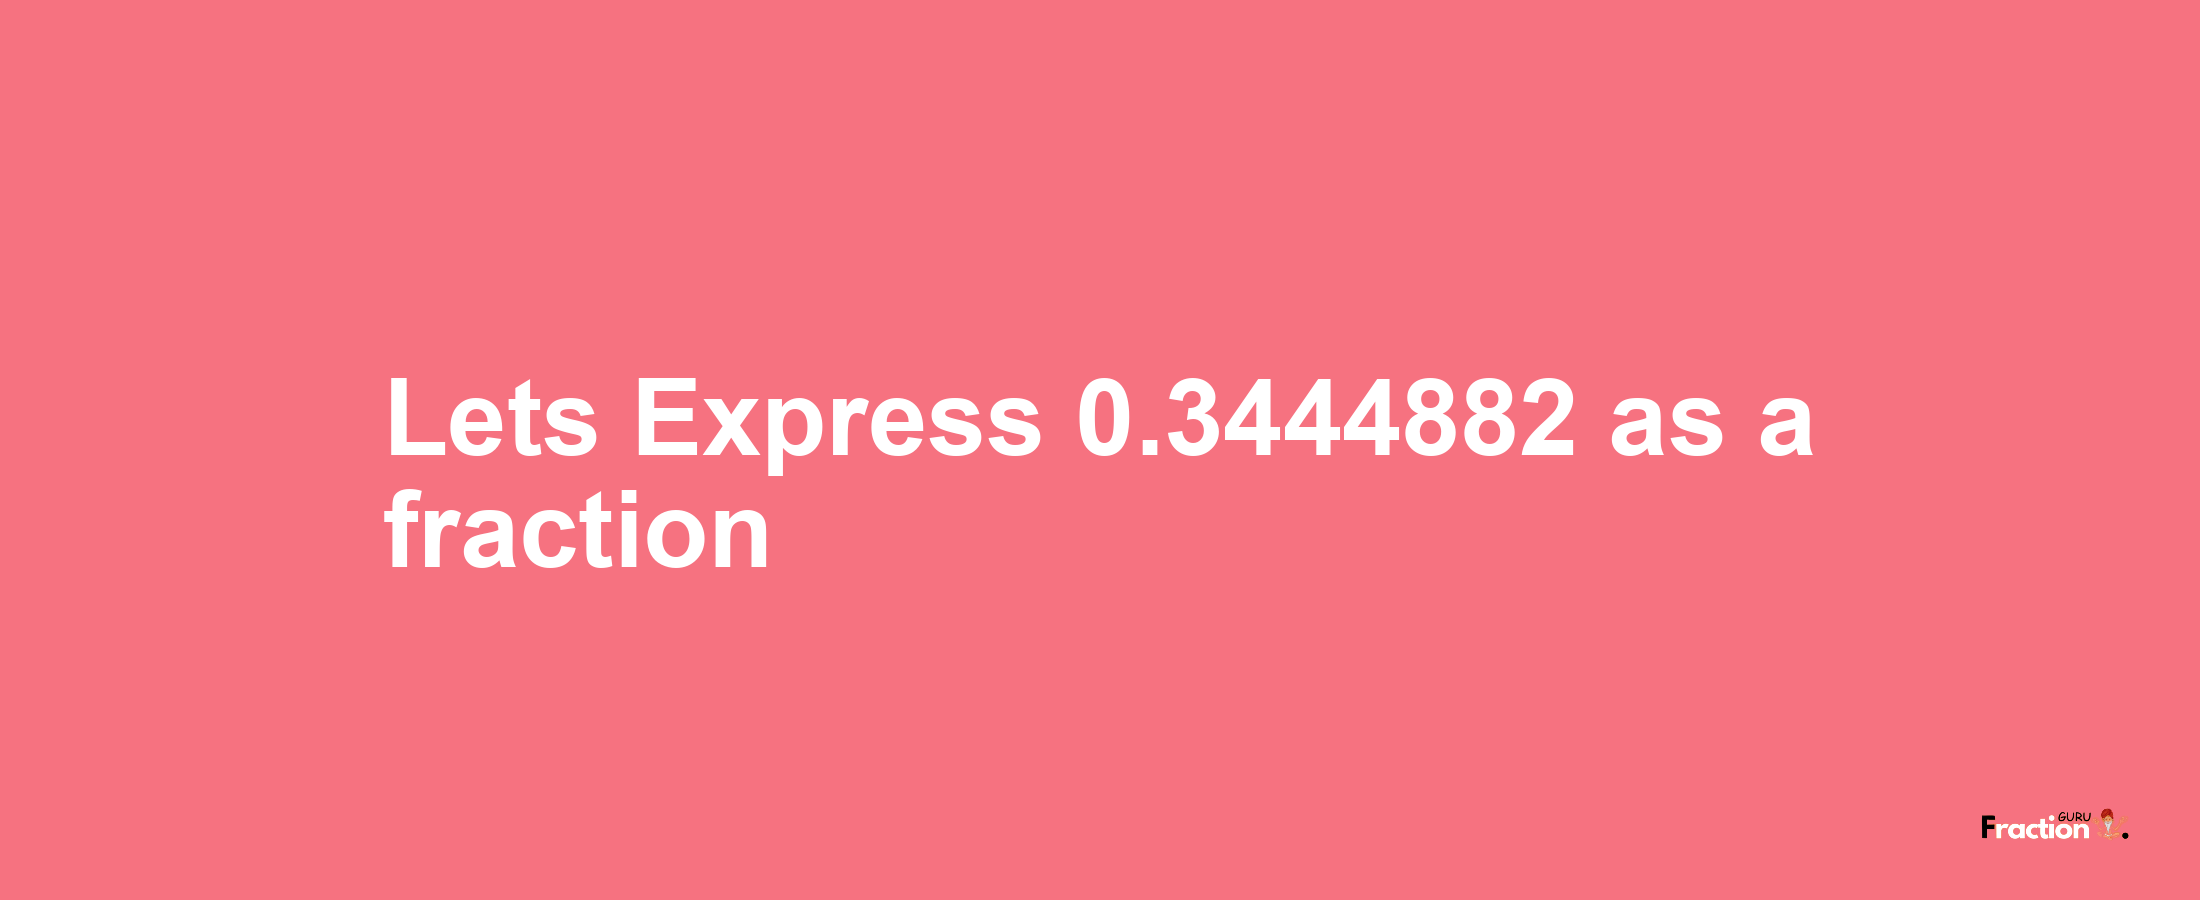 Lets Express 0.3444882 as afraction